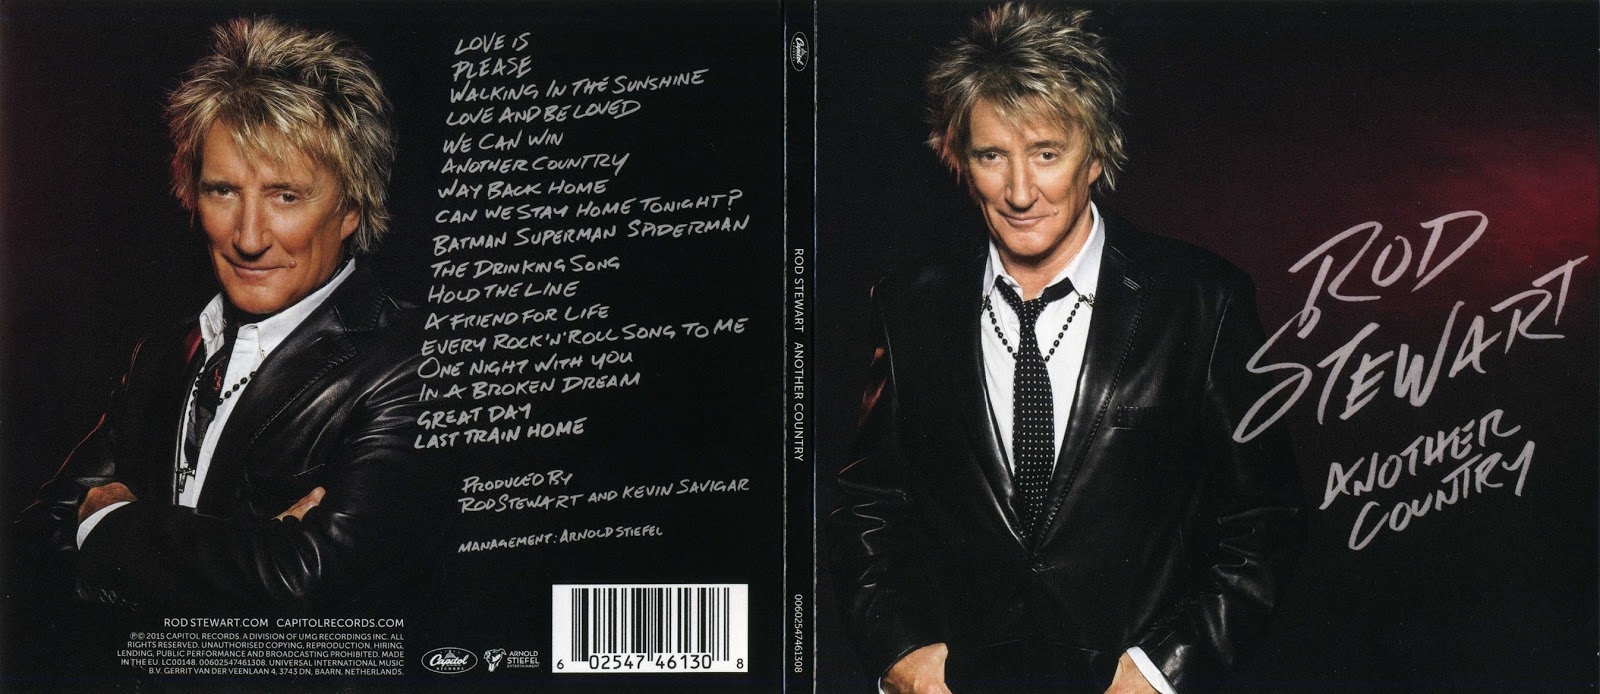 Rod stewart auld lang syne meaning